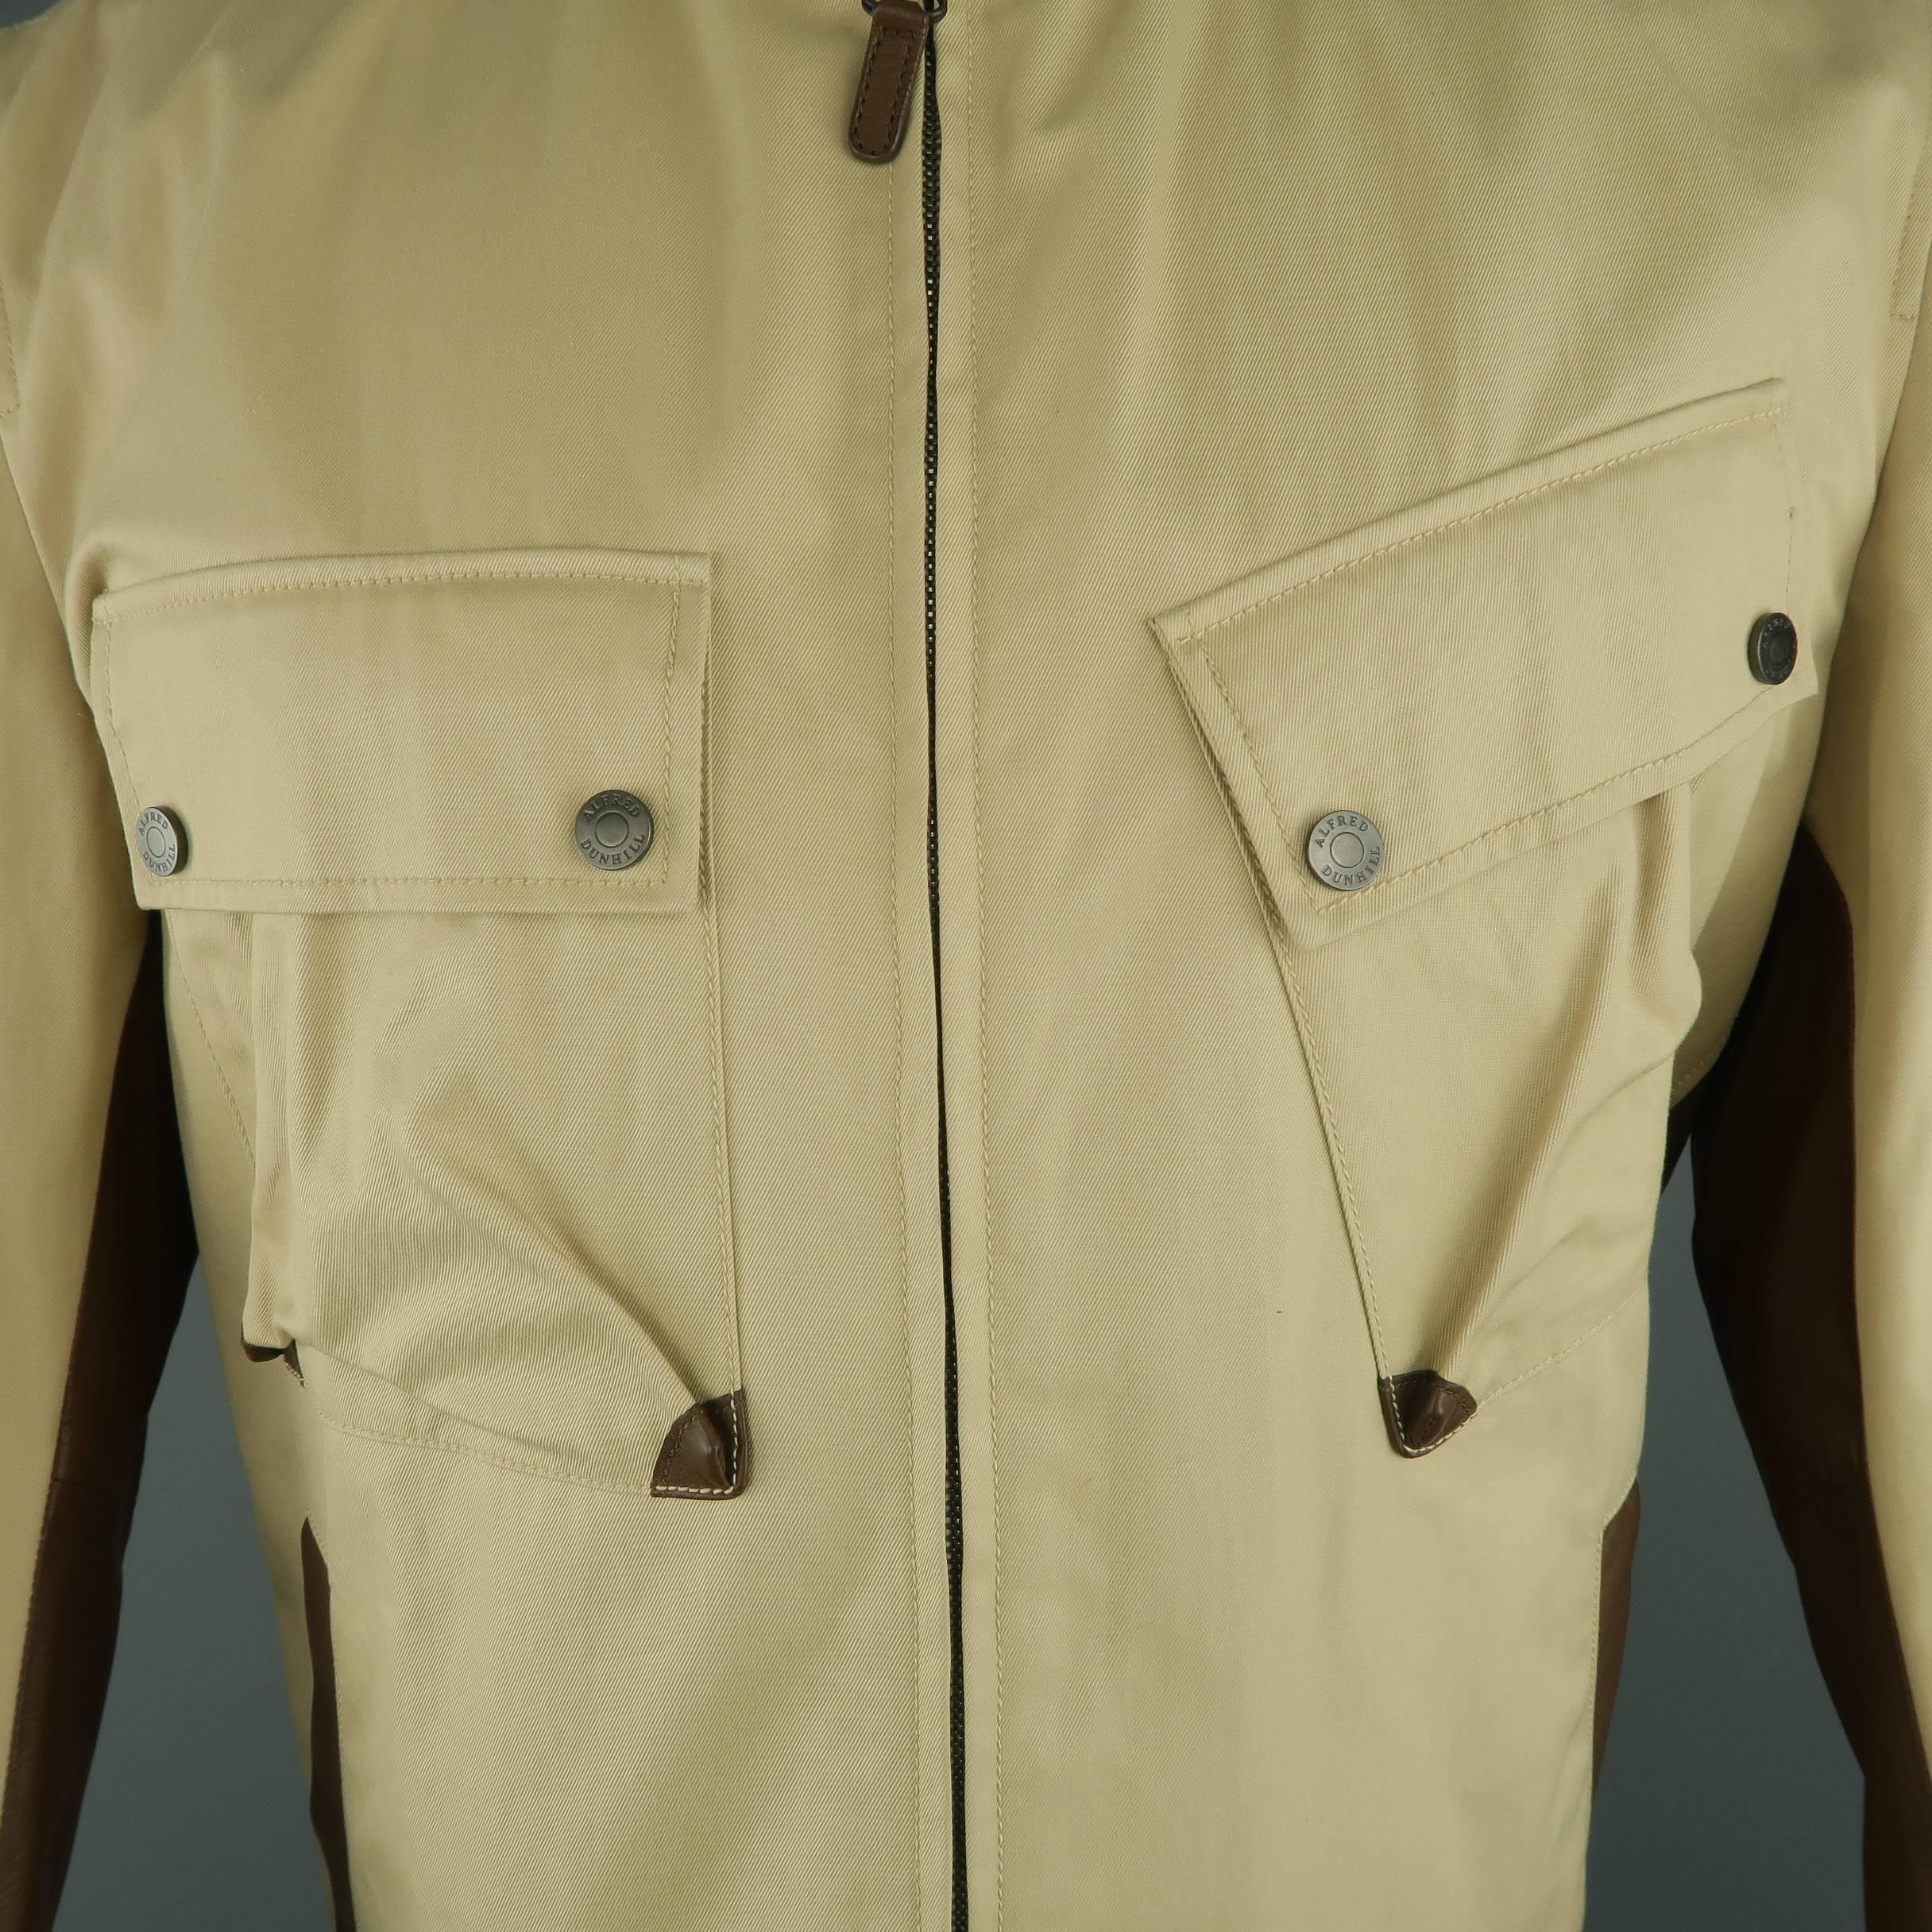 DUNHILL motorcycle style jacket comes in khaki twill canvas  and features a brown leather band collar, double chest flap pockets, slanted slit pockets, and leather side panels. Small spot at bottom front. As-is.
 
Good Pre-Owned Condition.
Marked: